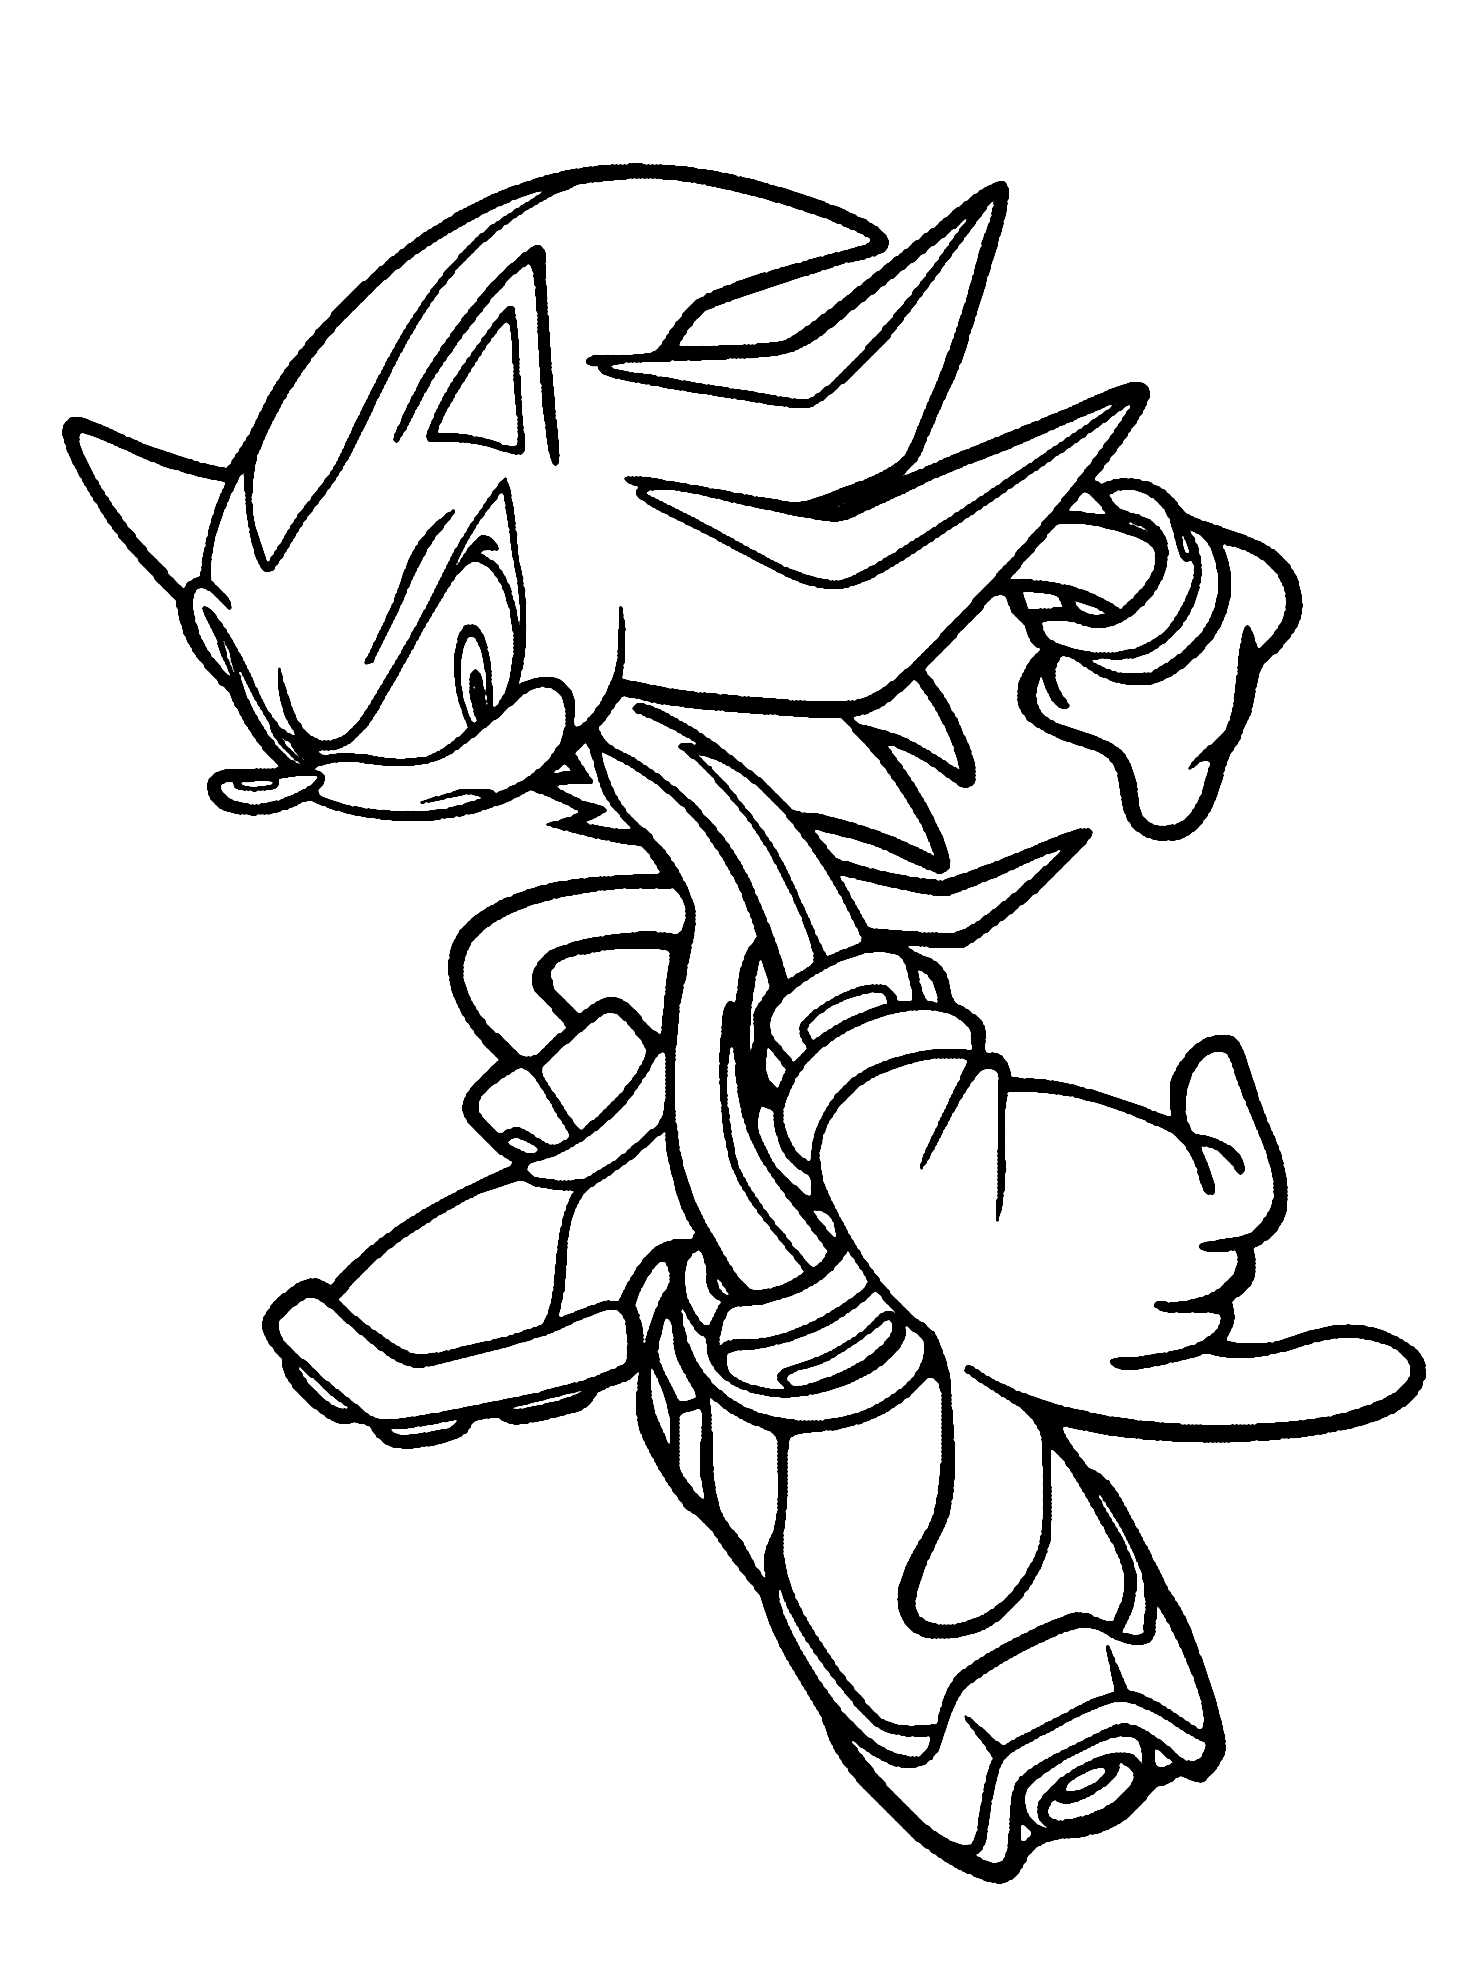 shadow coloring pages sonic shadow character coloring picture for kids pärlor coloring shadow pages 